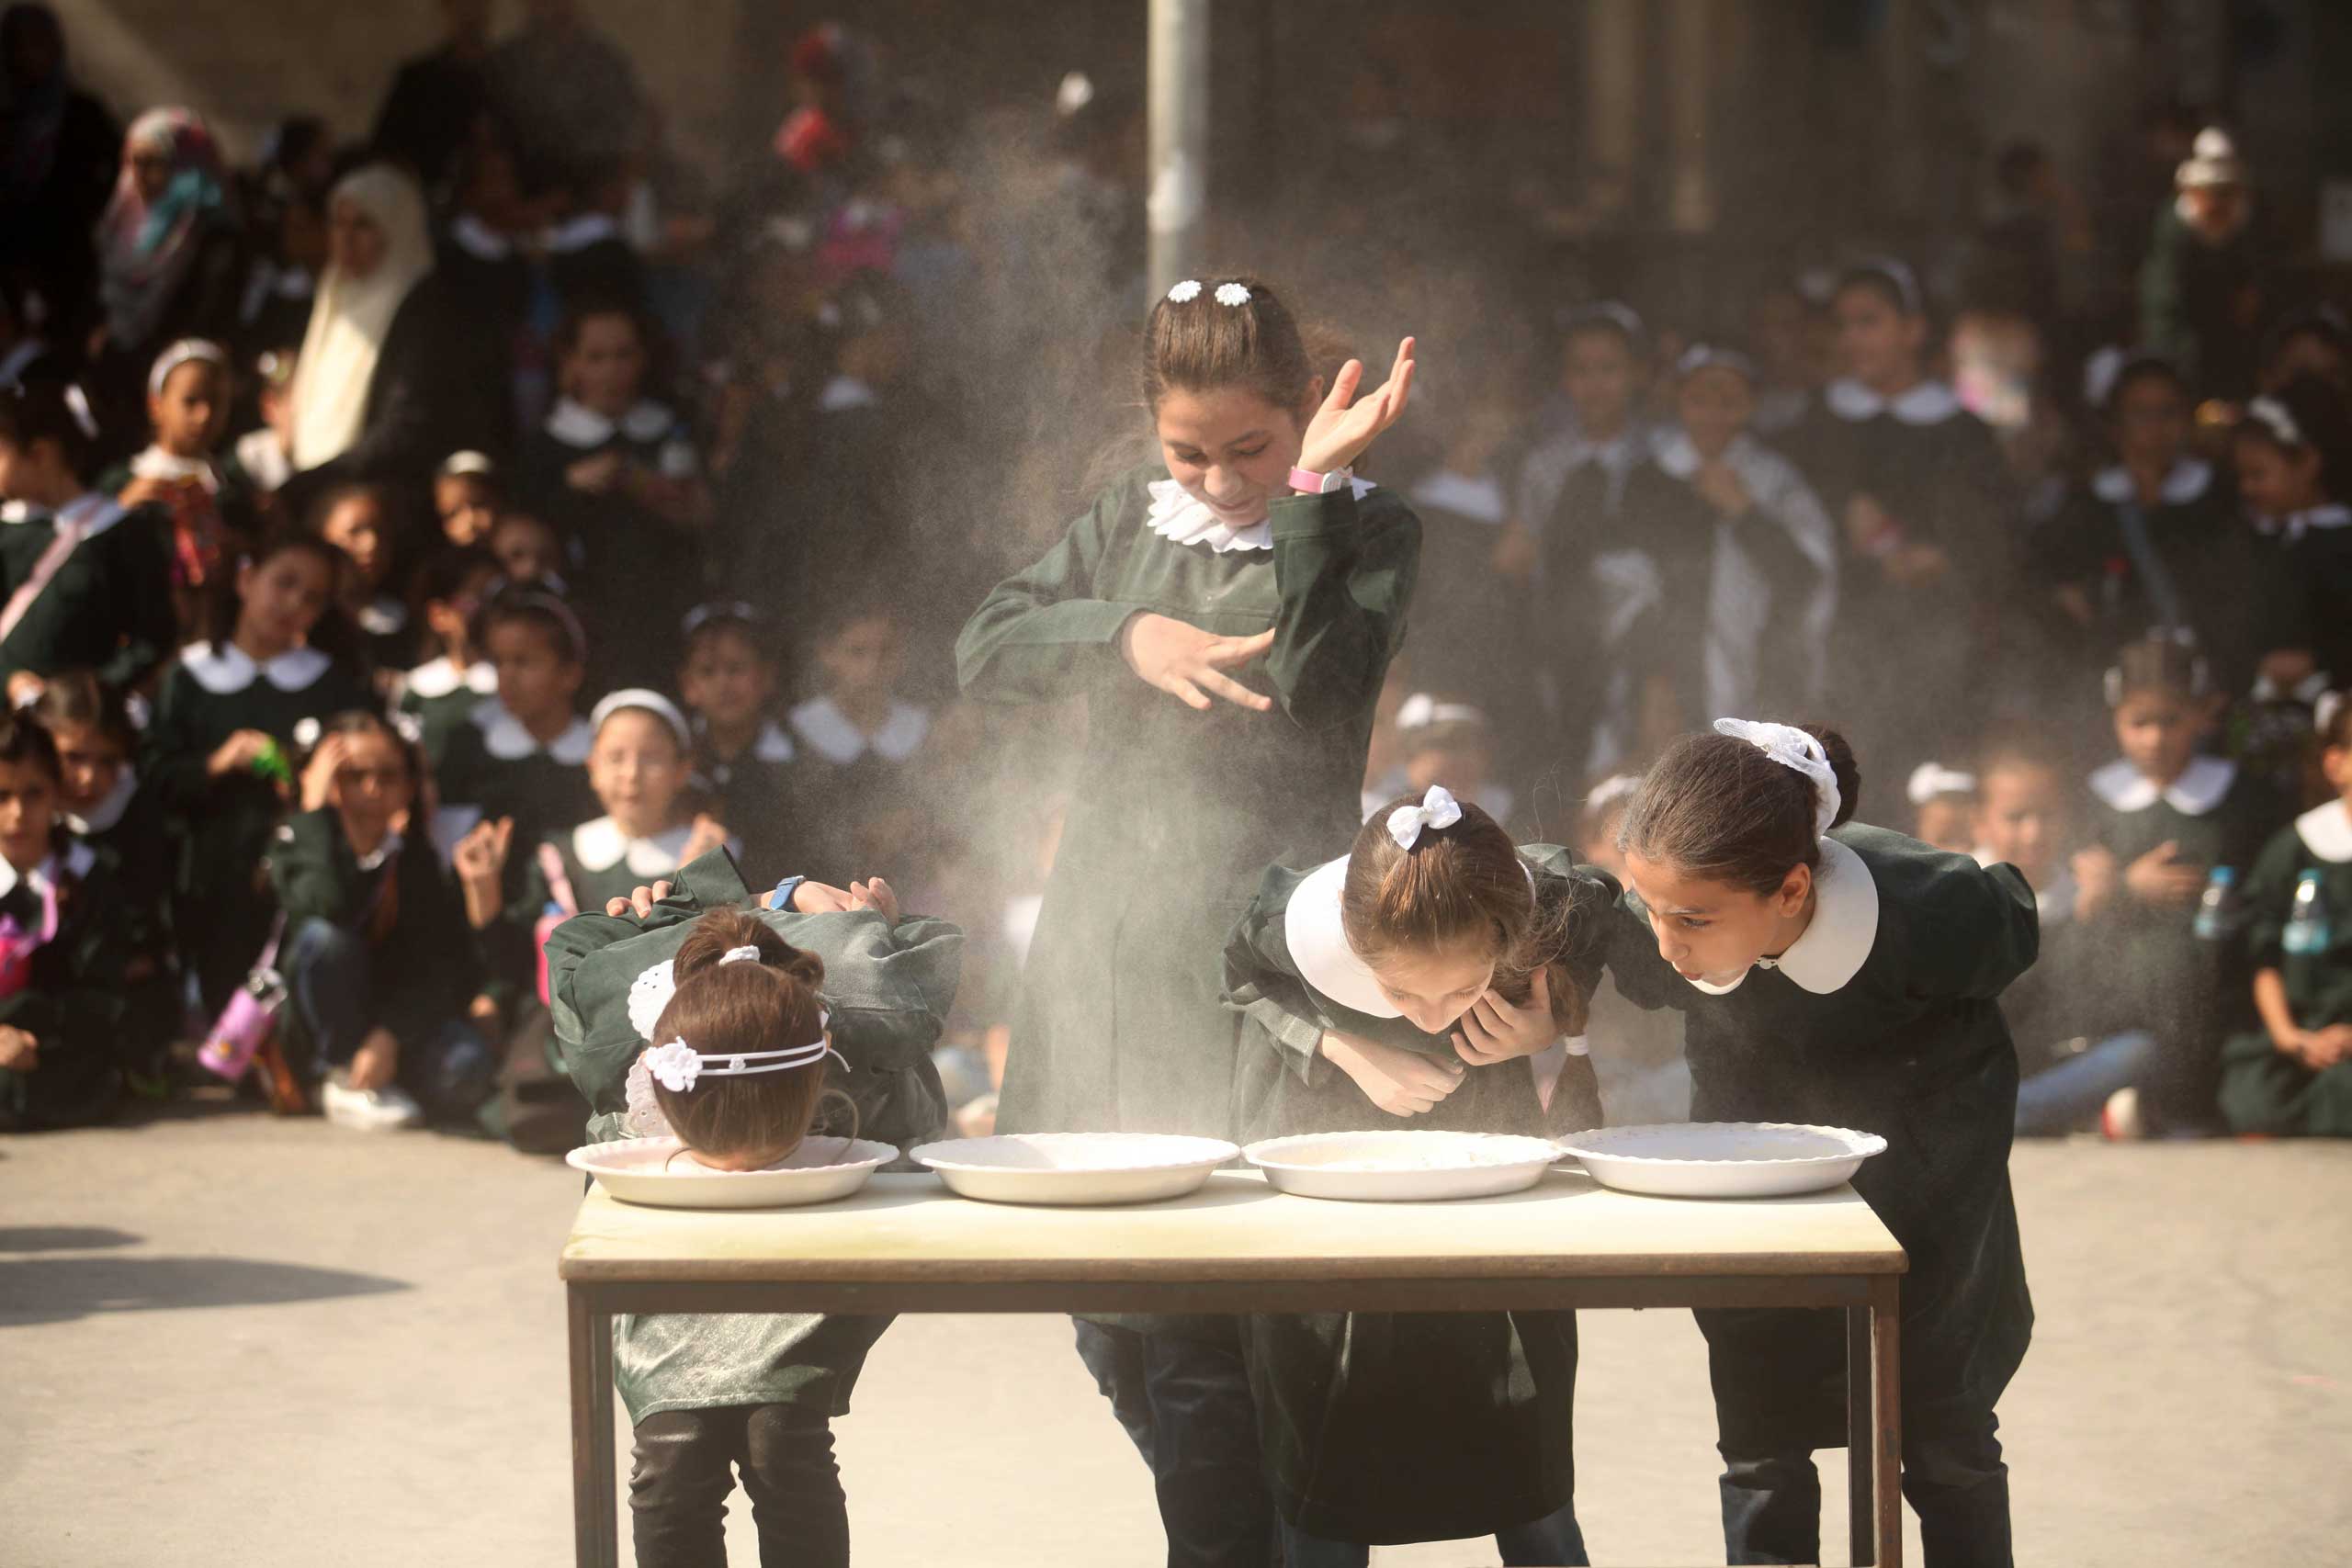 Sept. 18, 2014. Palestinian students in a school in Gaza City.